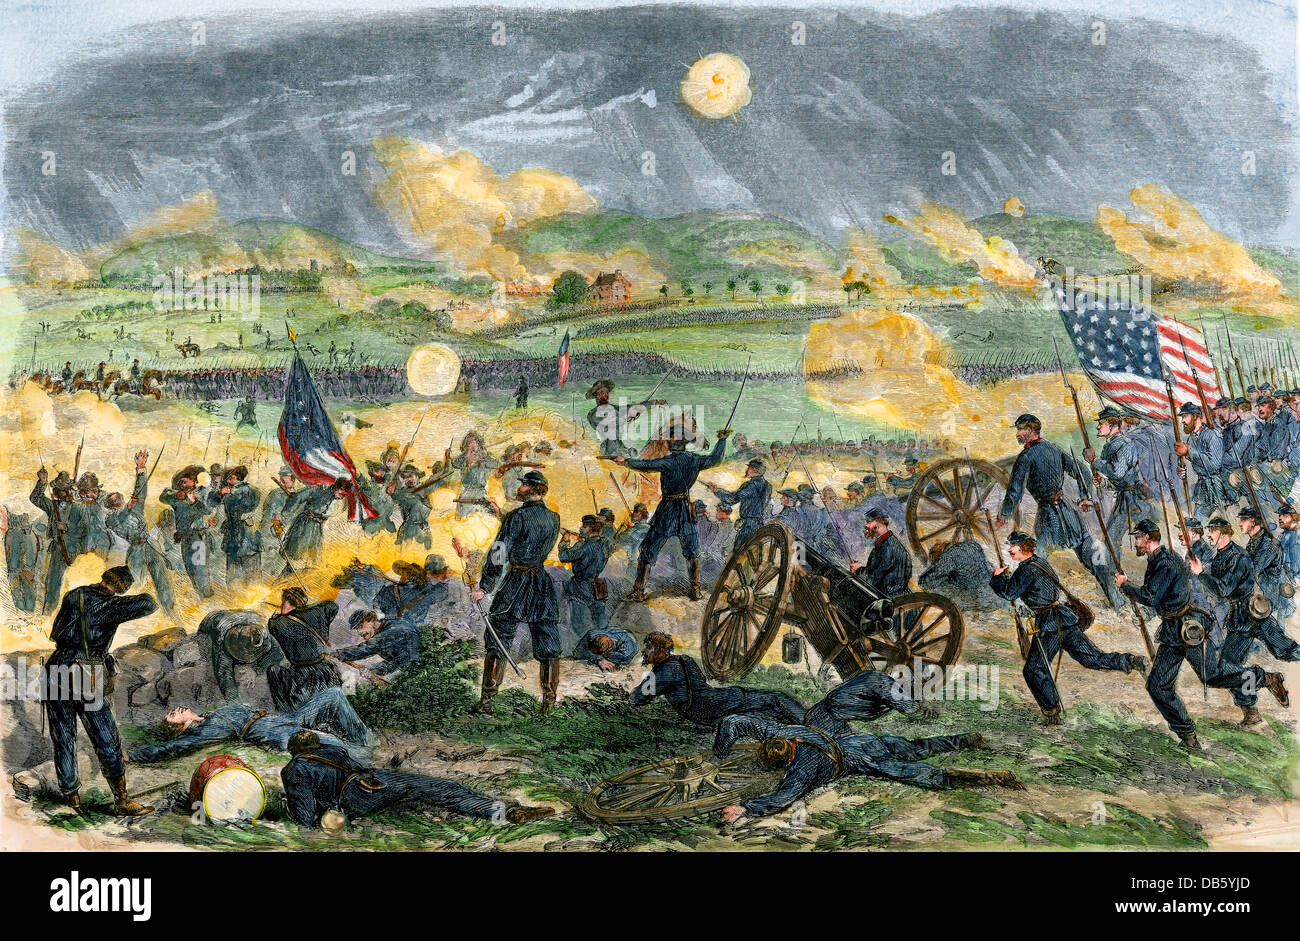 Confederate General Longstreet attacks Union lines, Battle of Gettysburg, 1863. Hand-colored woodcut Stock Photo